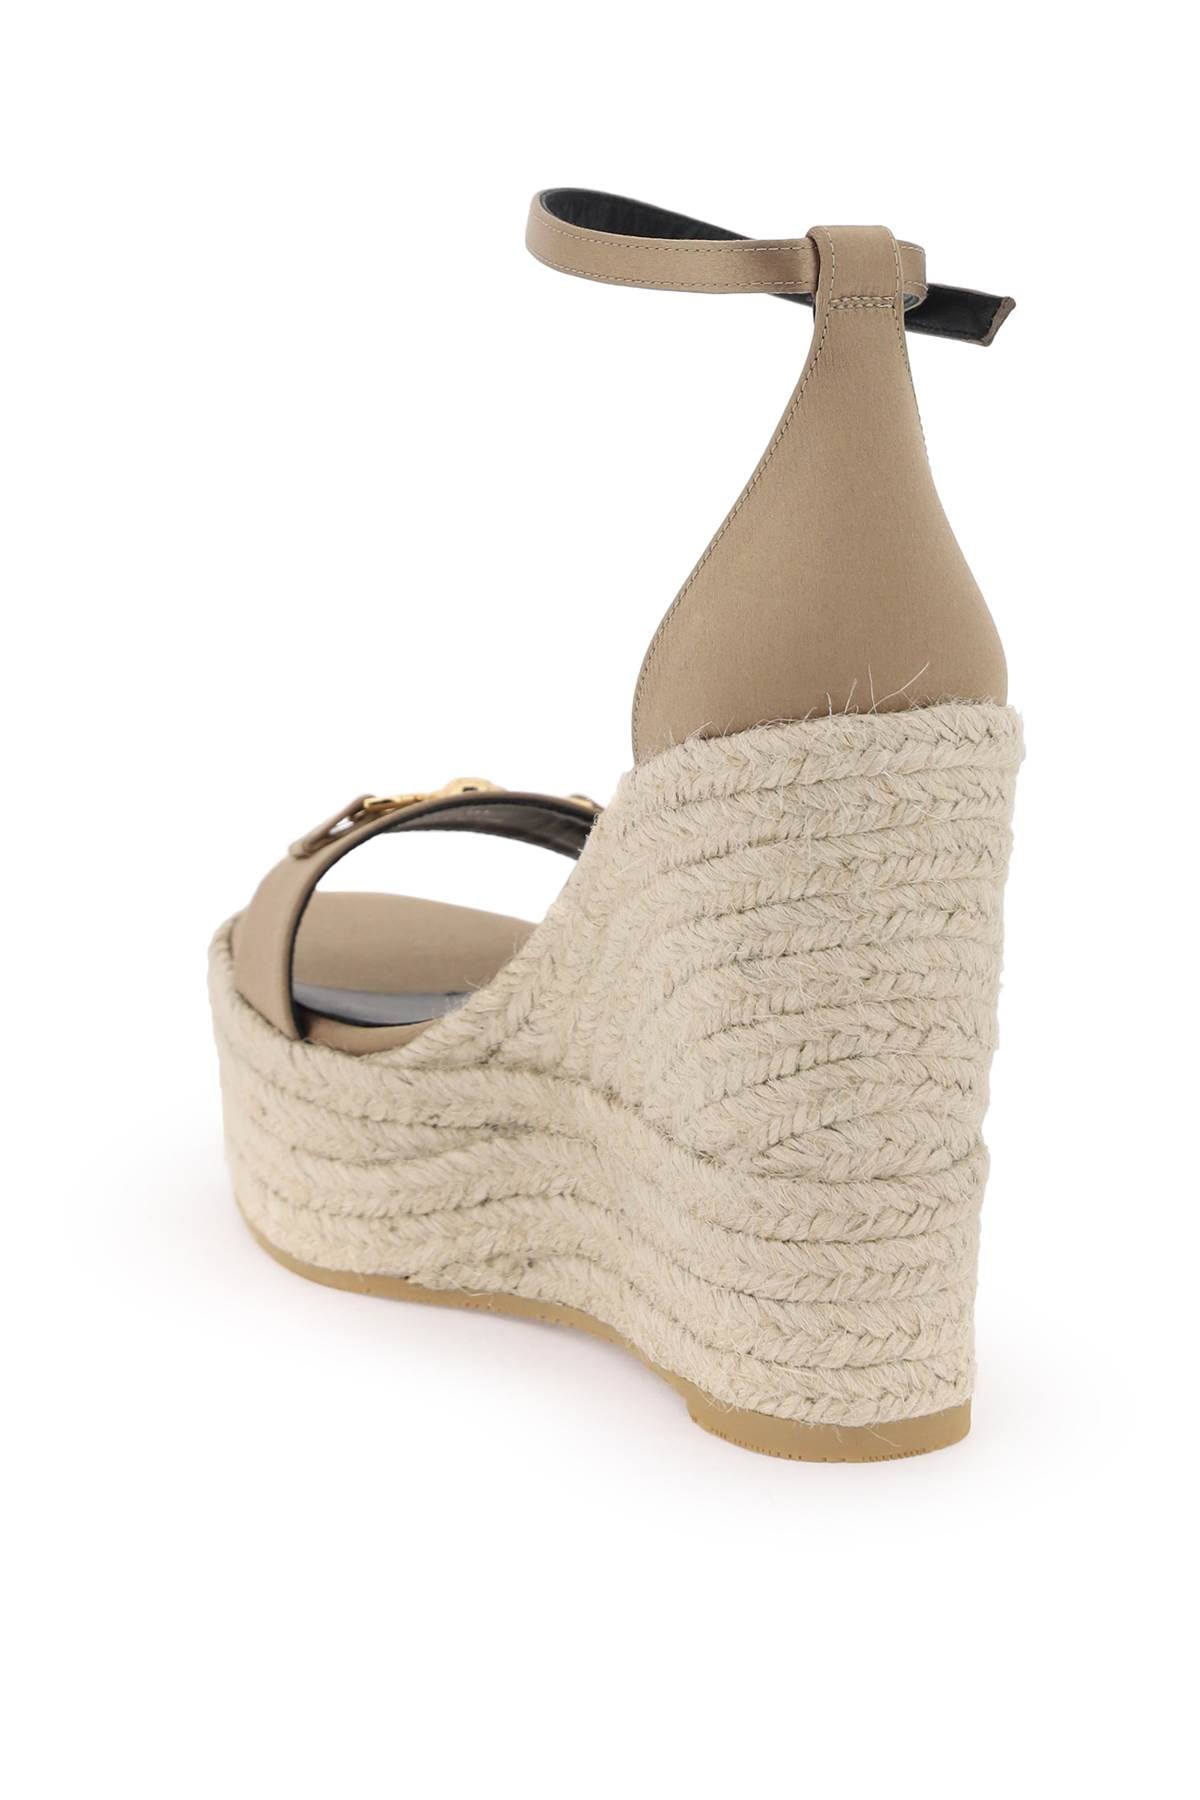 VERSACE Beige Satin Wedge Sandals with Crystal Medusa Detail for Women